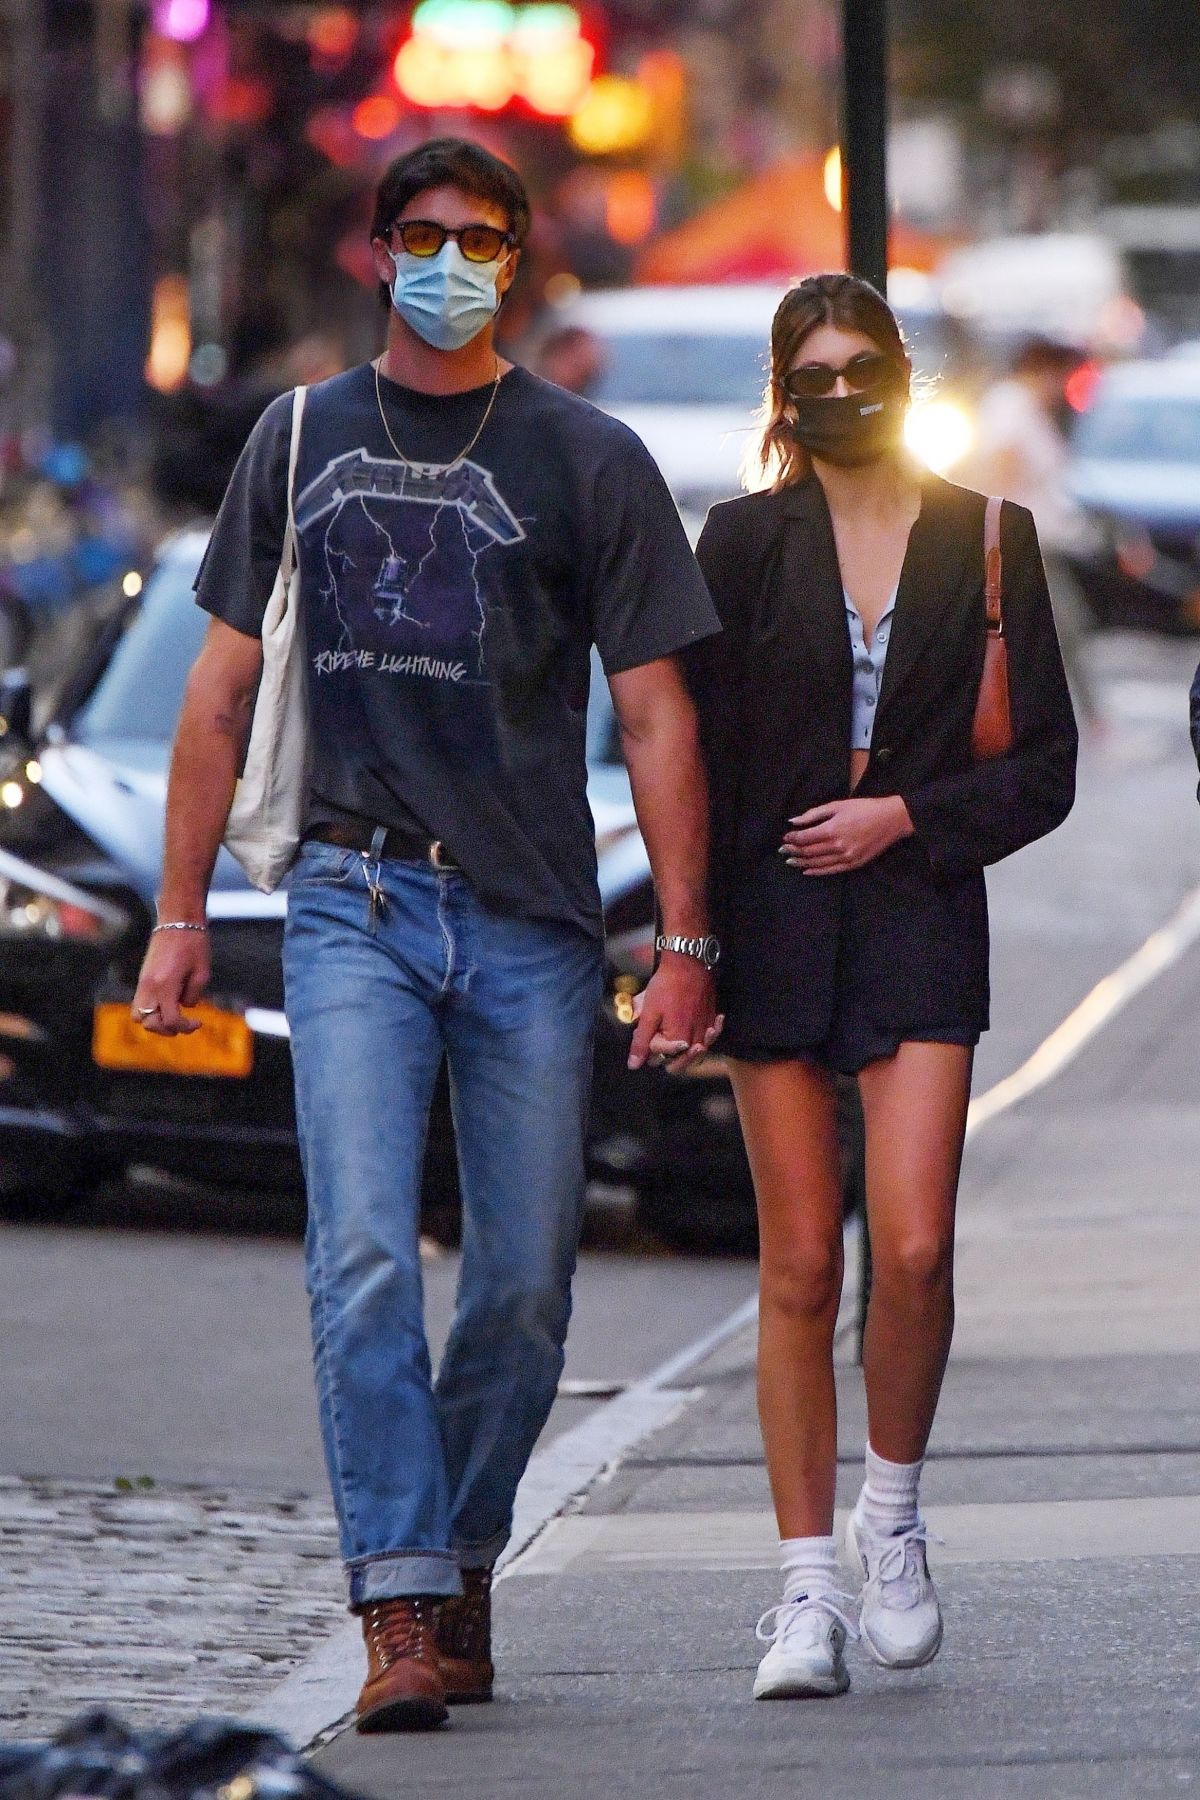 kaia-gerber-and-jacob-elordi-heading-to-their-apartment-in-new-york-09-11-2020-8.jpg